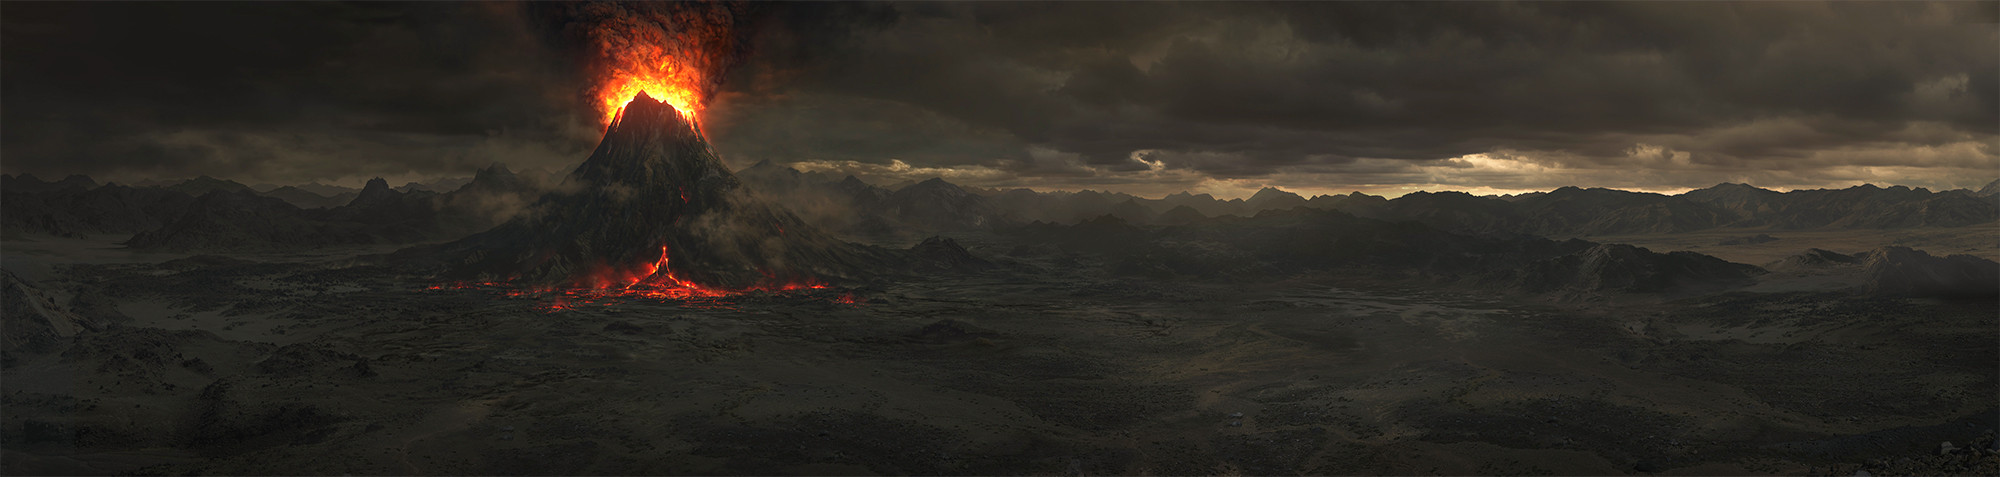 'Lord of the Rings' : 'Shadows of Mordor' / Matte Painting  / PANO